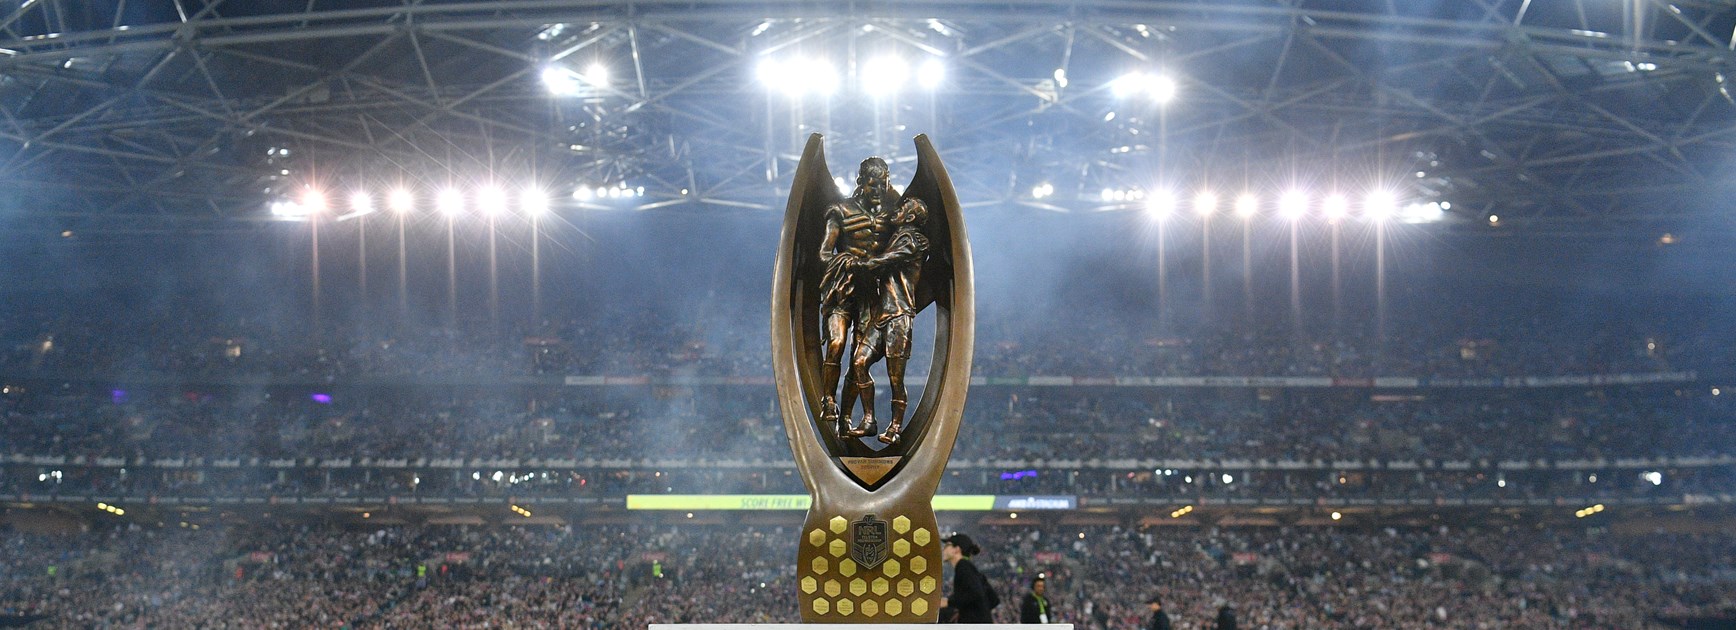 NRL grand final schedule: Everything you need to know